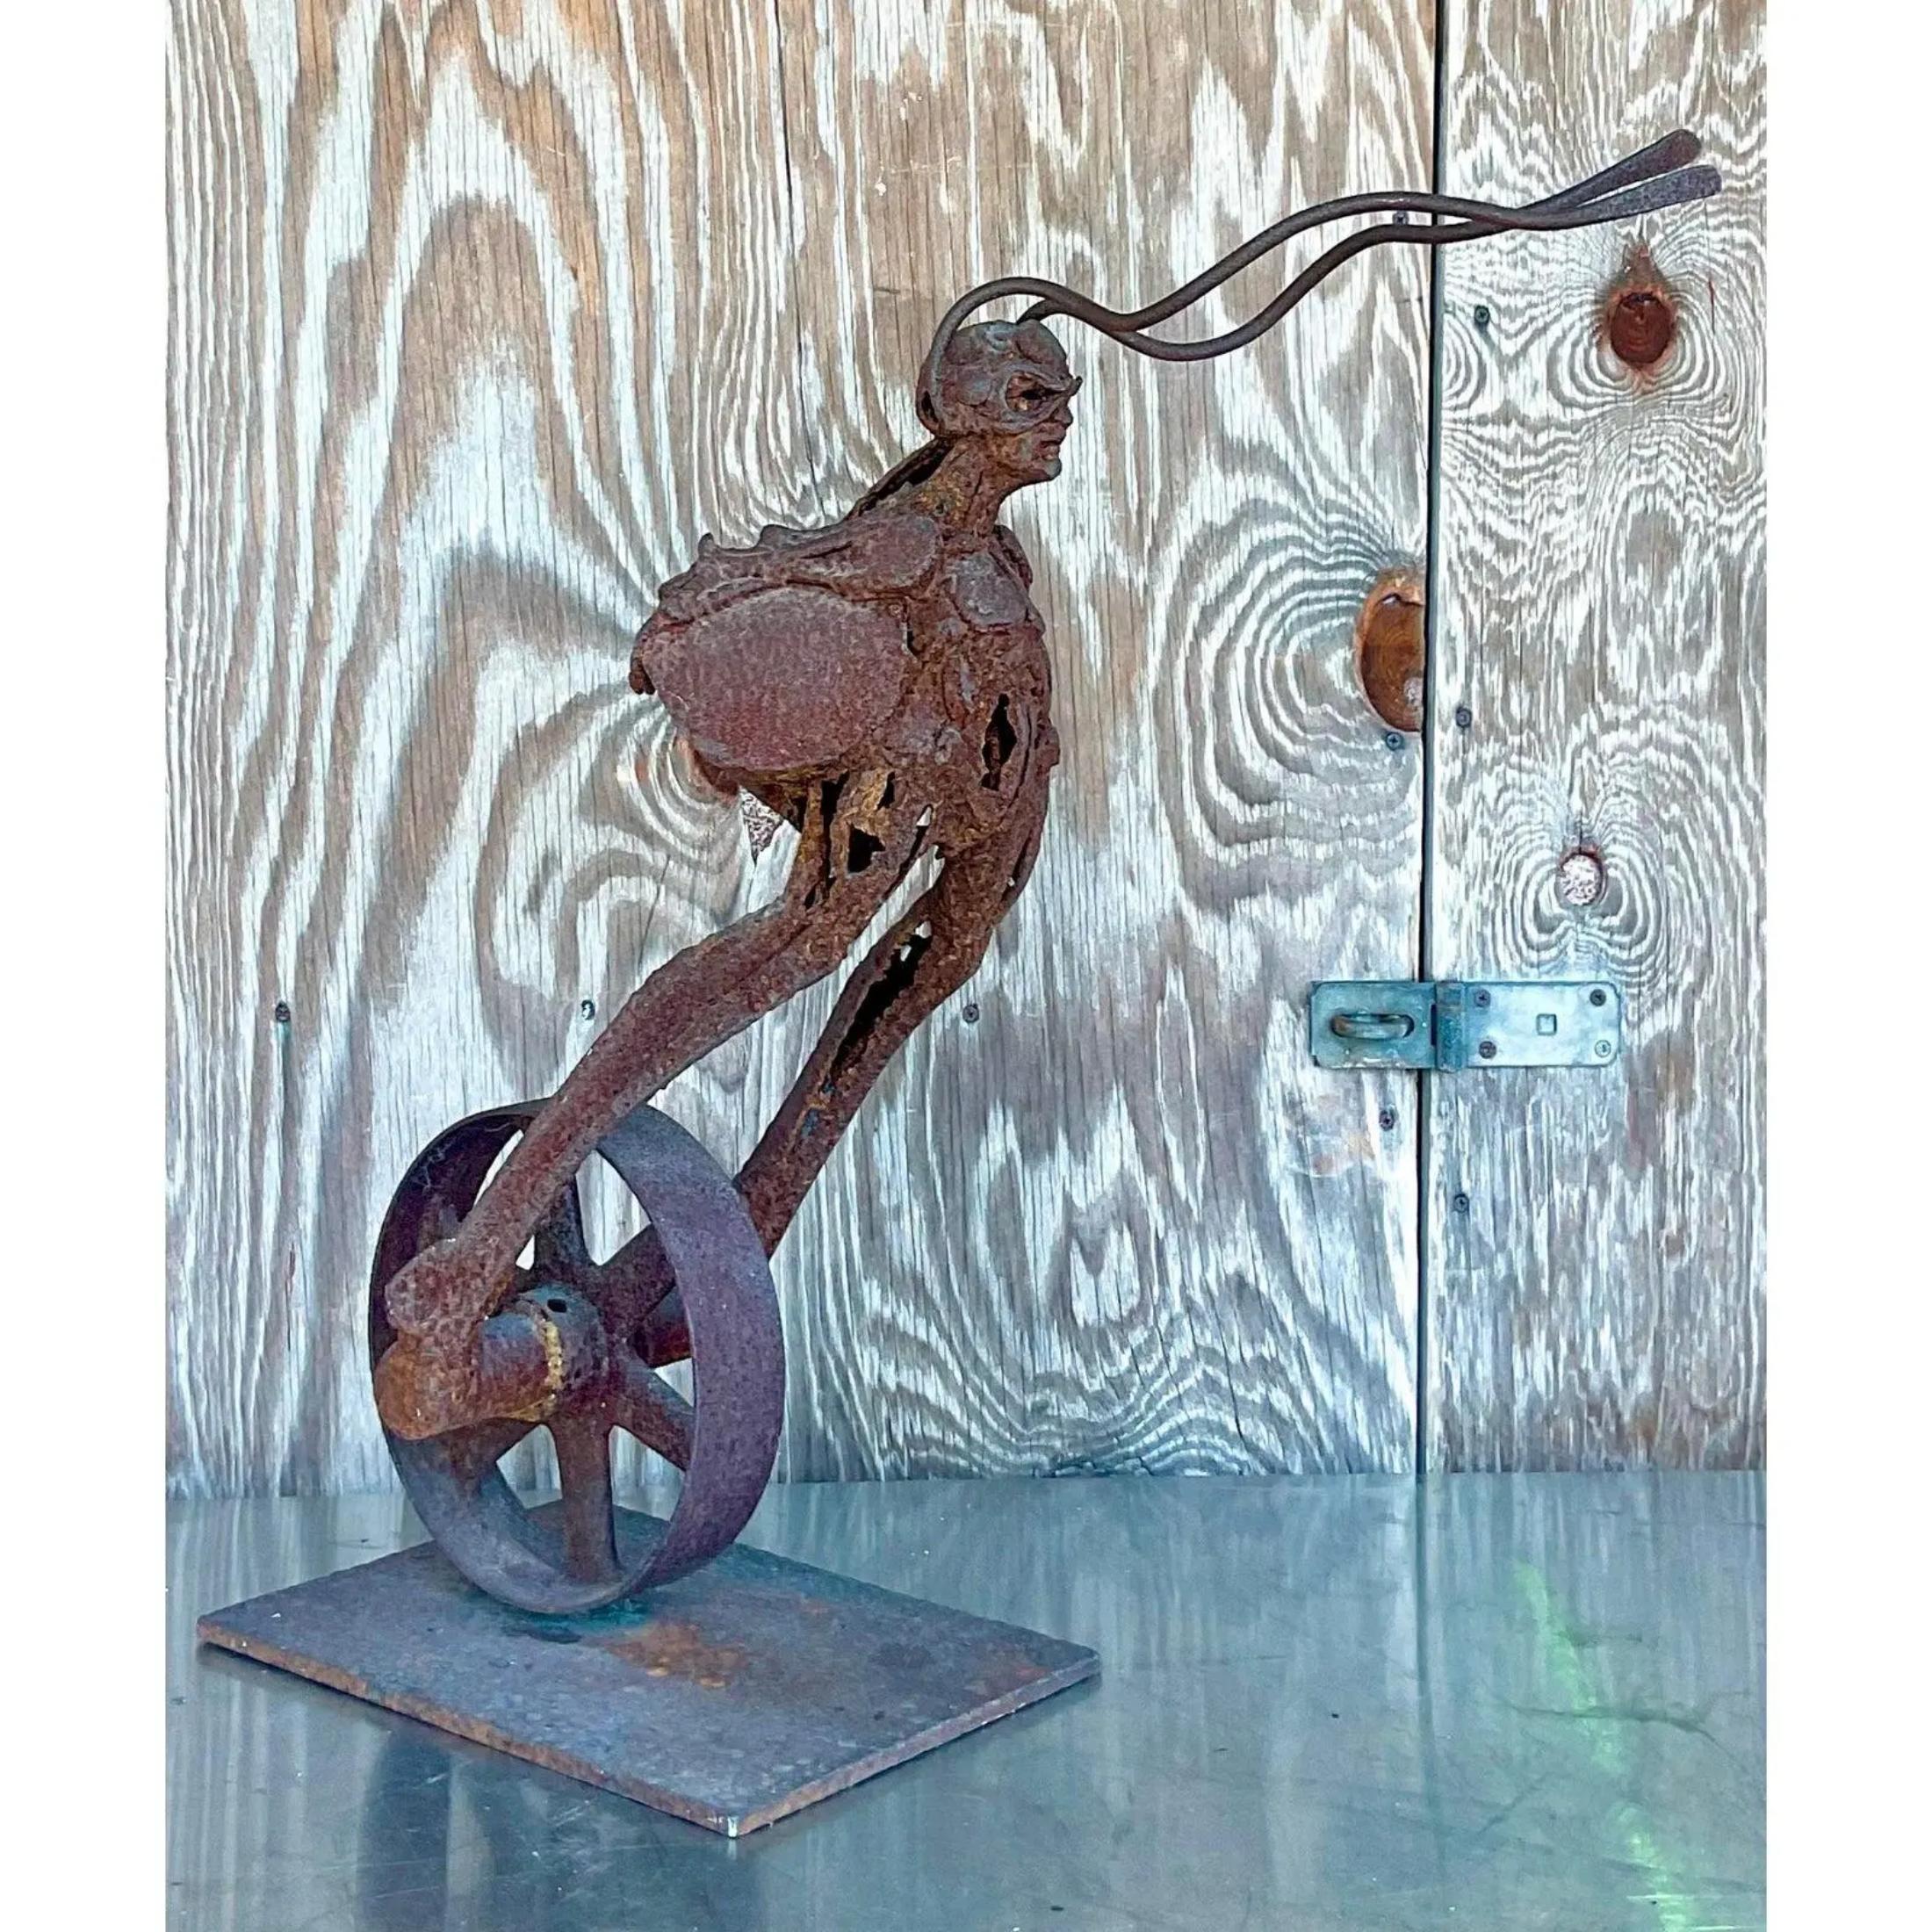 Vintage Boho distressed sculpture. An intriguing composition of a figure in a helmet riding on a wheel. So awesome. Acquired from a Palm Beach estate.